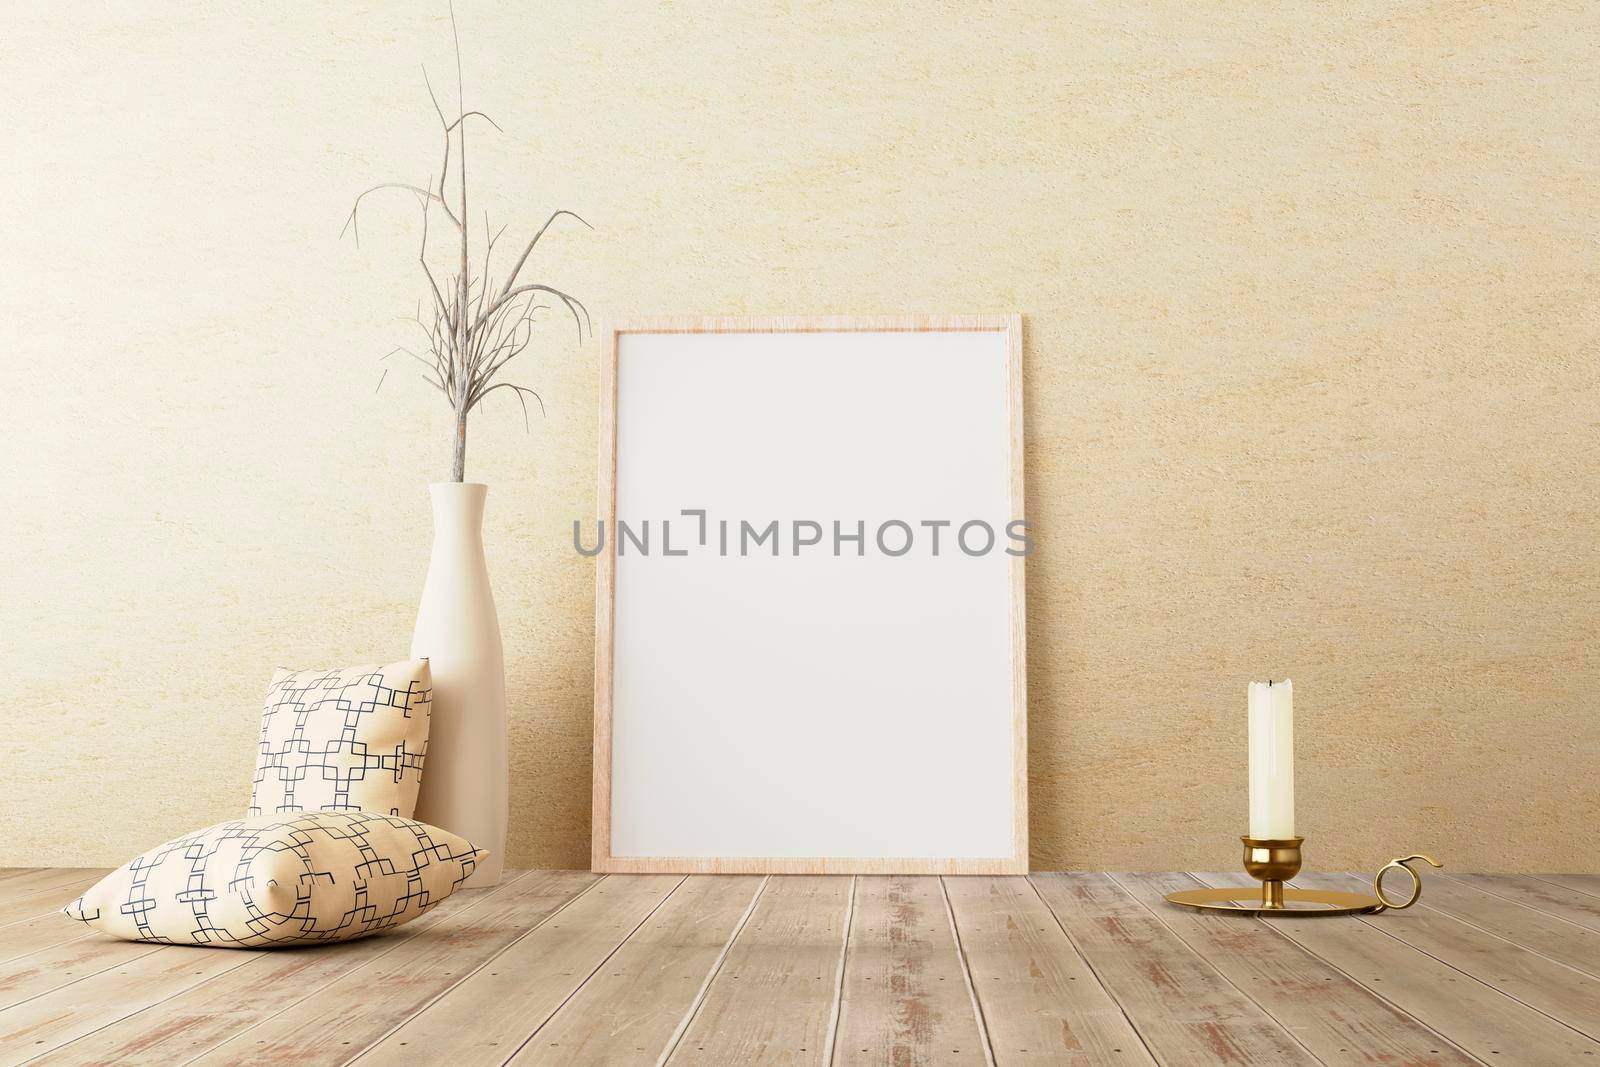 Vertical frame mockup standing on wooden floor in living room interior with dried plant on ceramic jug, candle and pillow on concrete wall background. 3d illustration by raferto1973